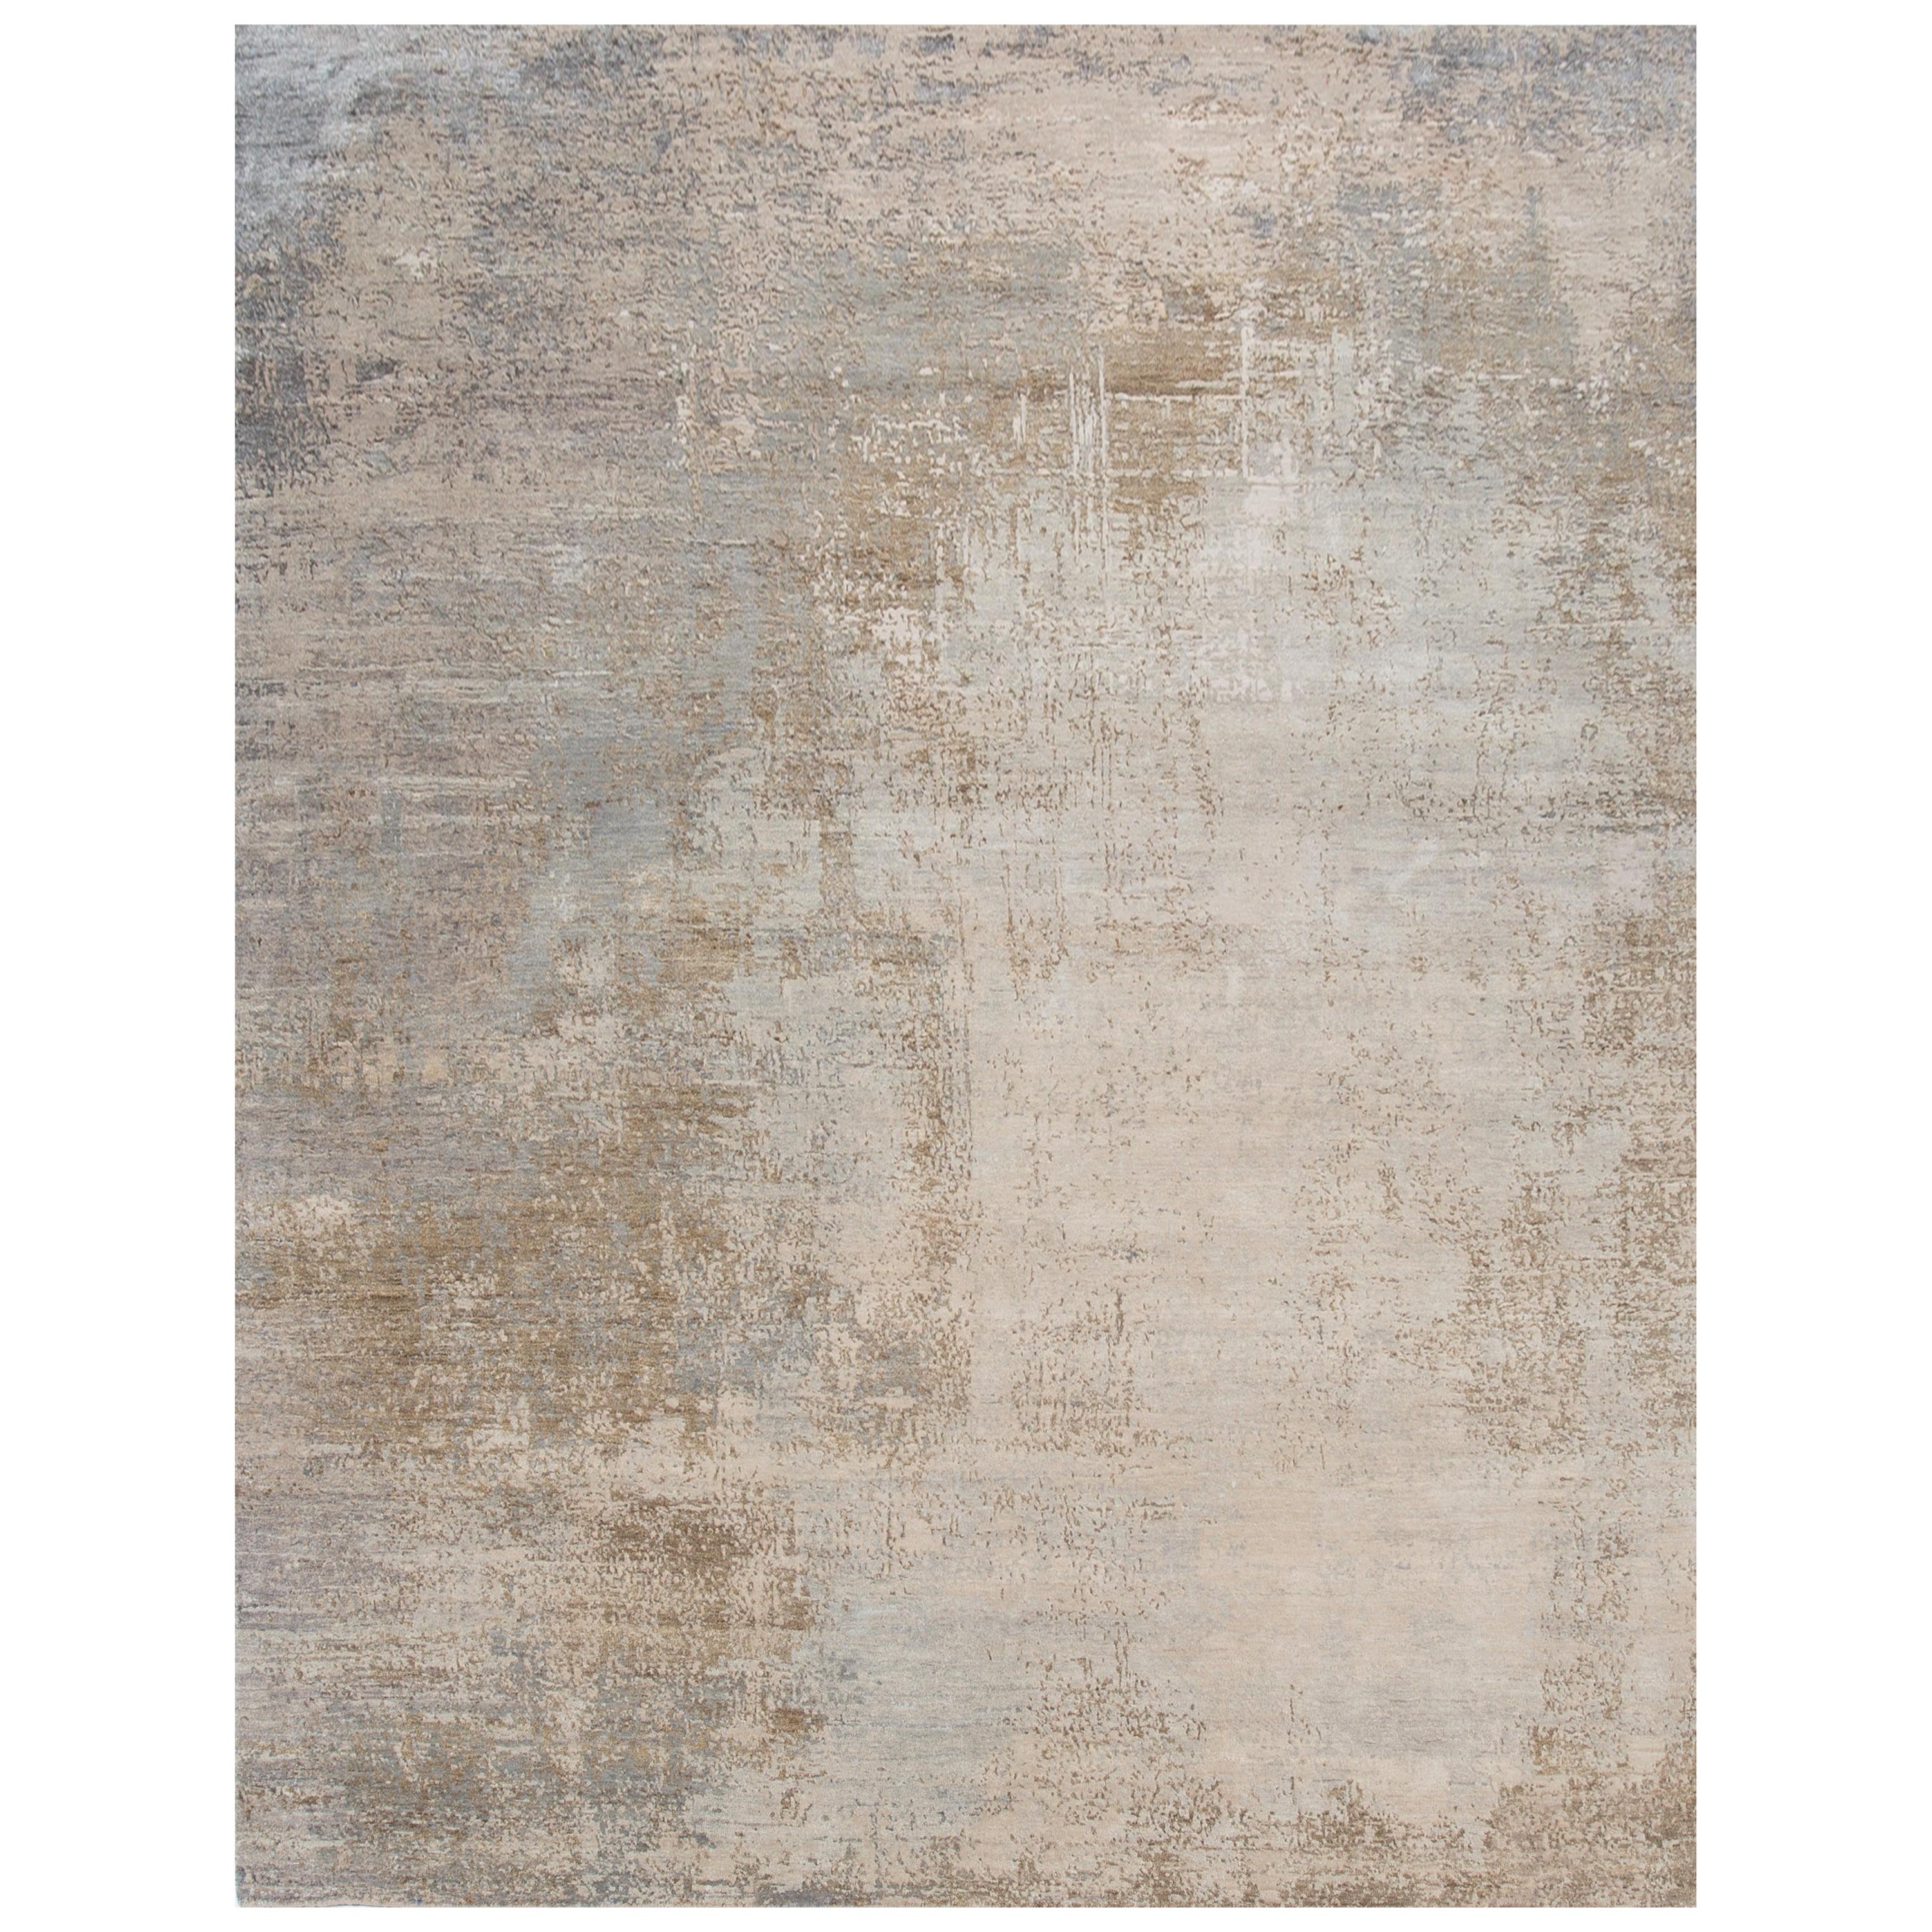 Ethereal Mesh Dark Ivory & Nickel 200X300 Cm Handknotted Rug For Sale